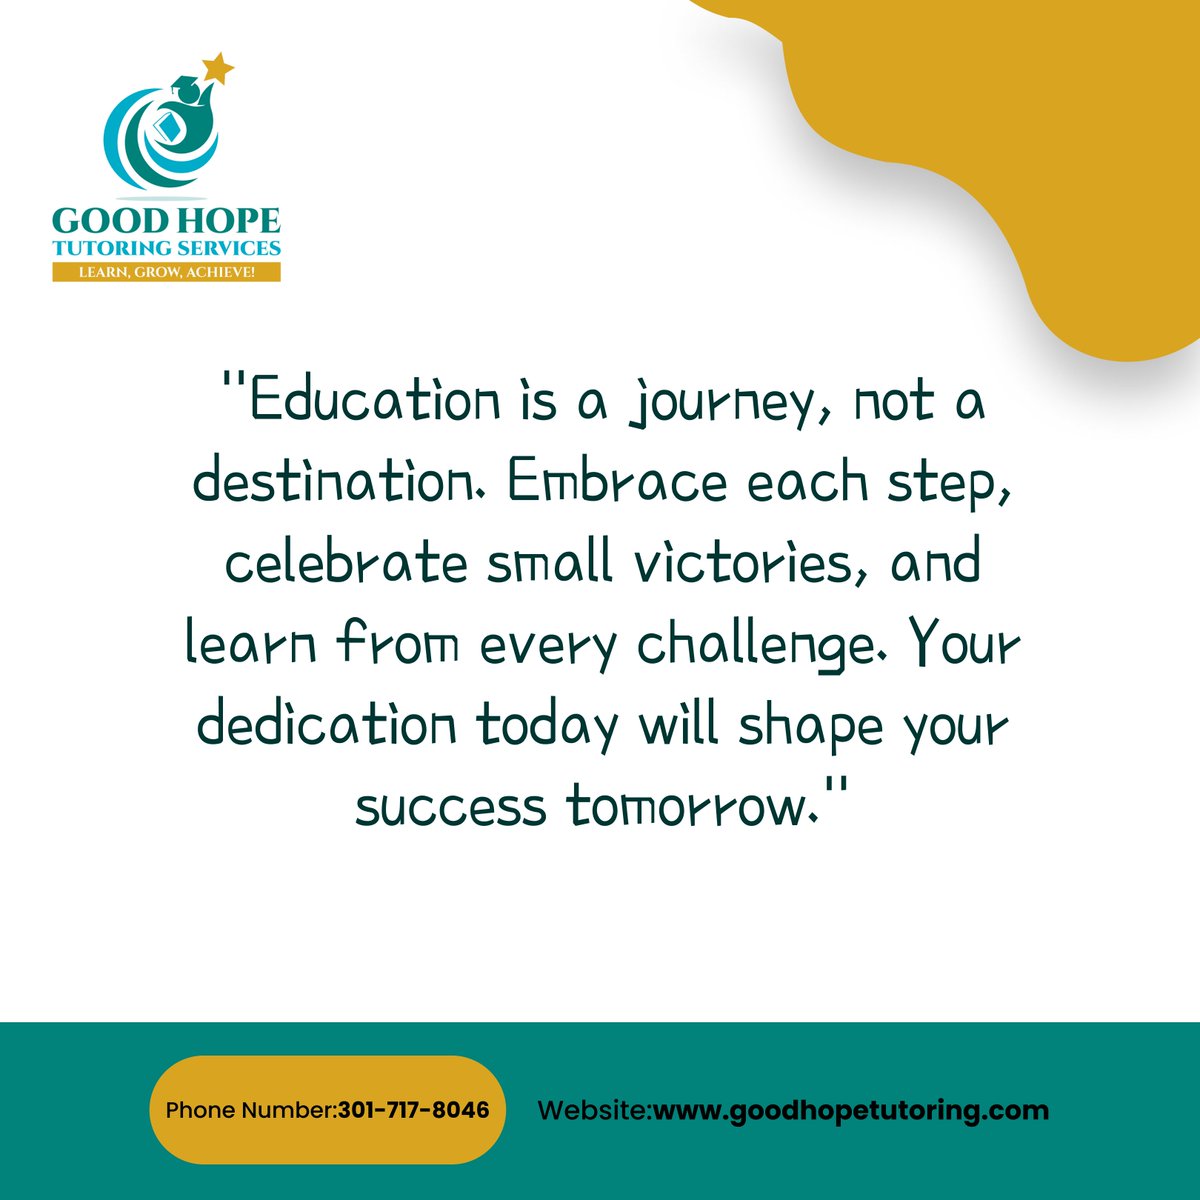 Education is a journey, not a destination. Embrace each step, celebrate small victories, and learn from every challenge. Your dedication today will shape your success tomorrow. 🌟📚💪 #Education #LearningJourney #Success #Dedication #CelebrateProgress #EmbraceChallenges